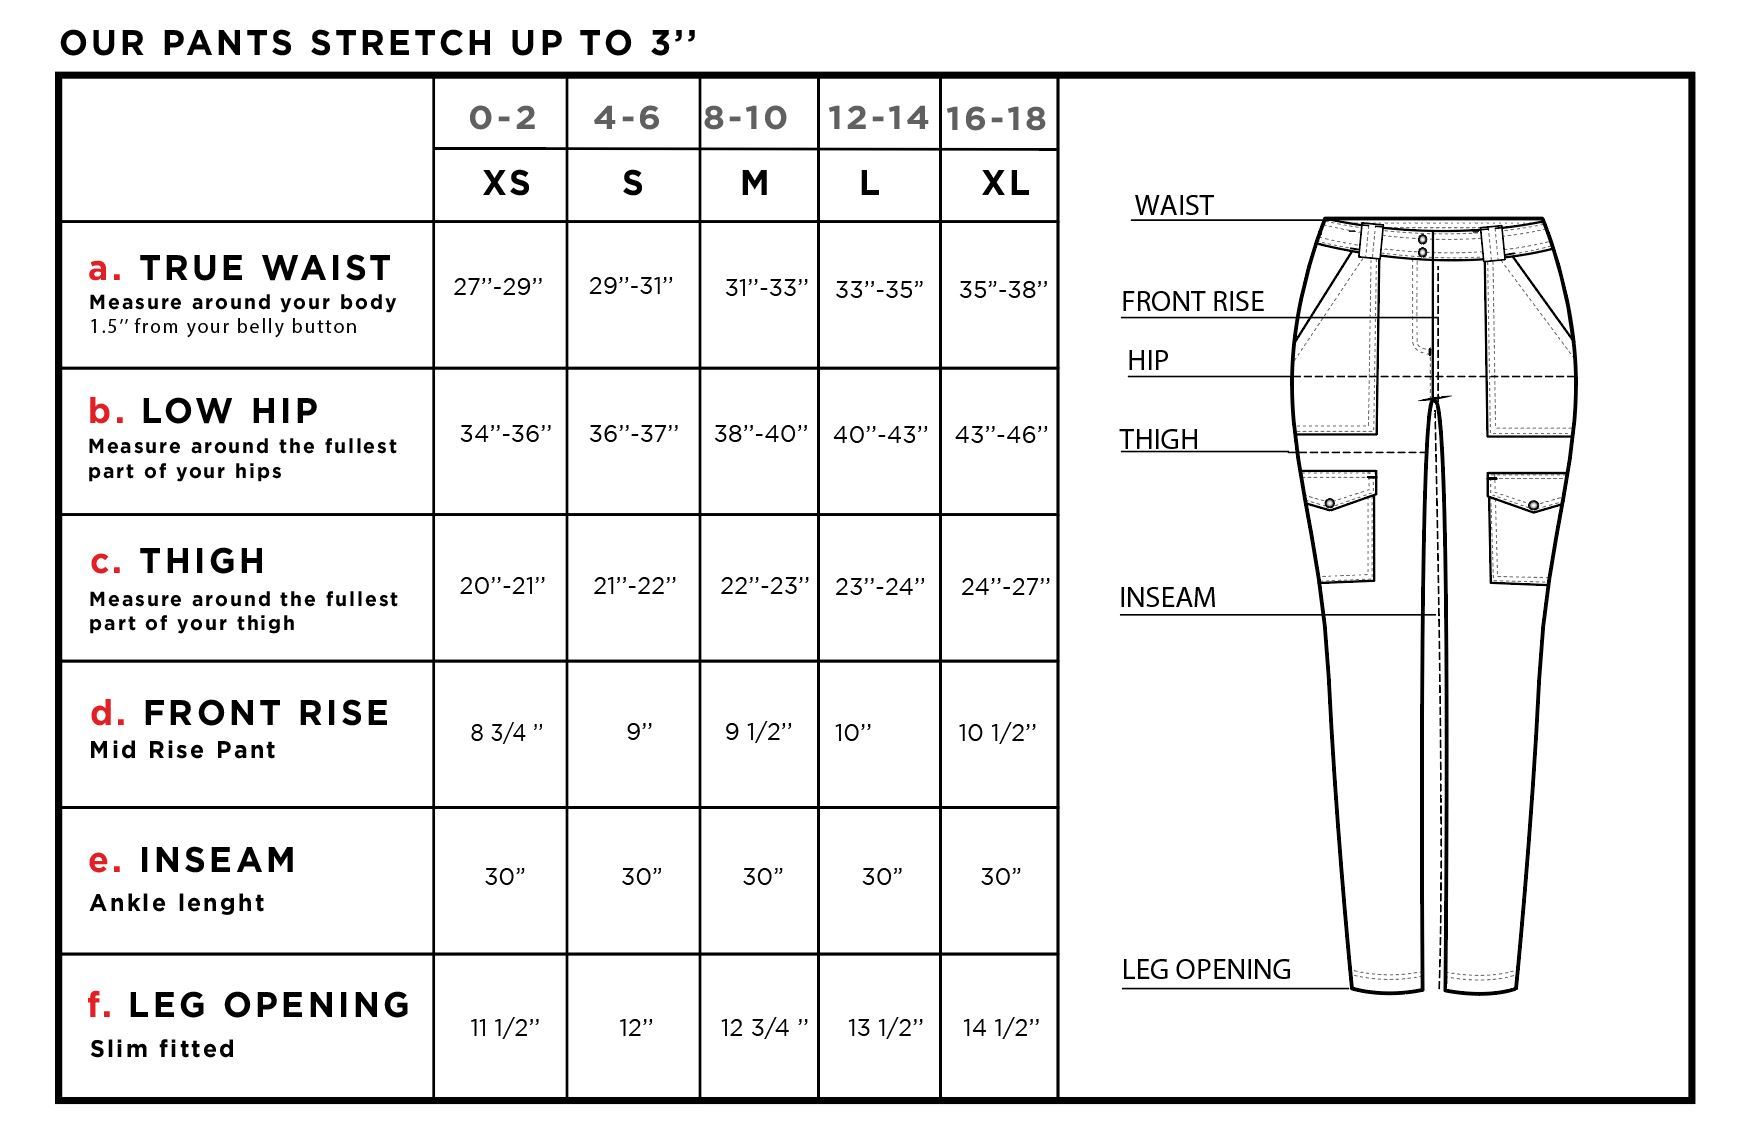 House of thuga  hotwearsng cargo pants  Size chart   Facebook